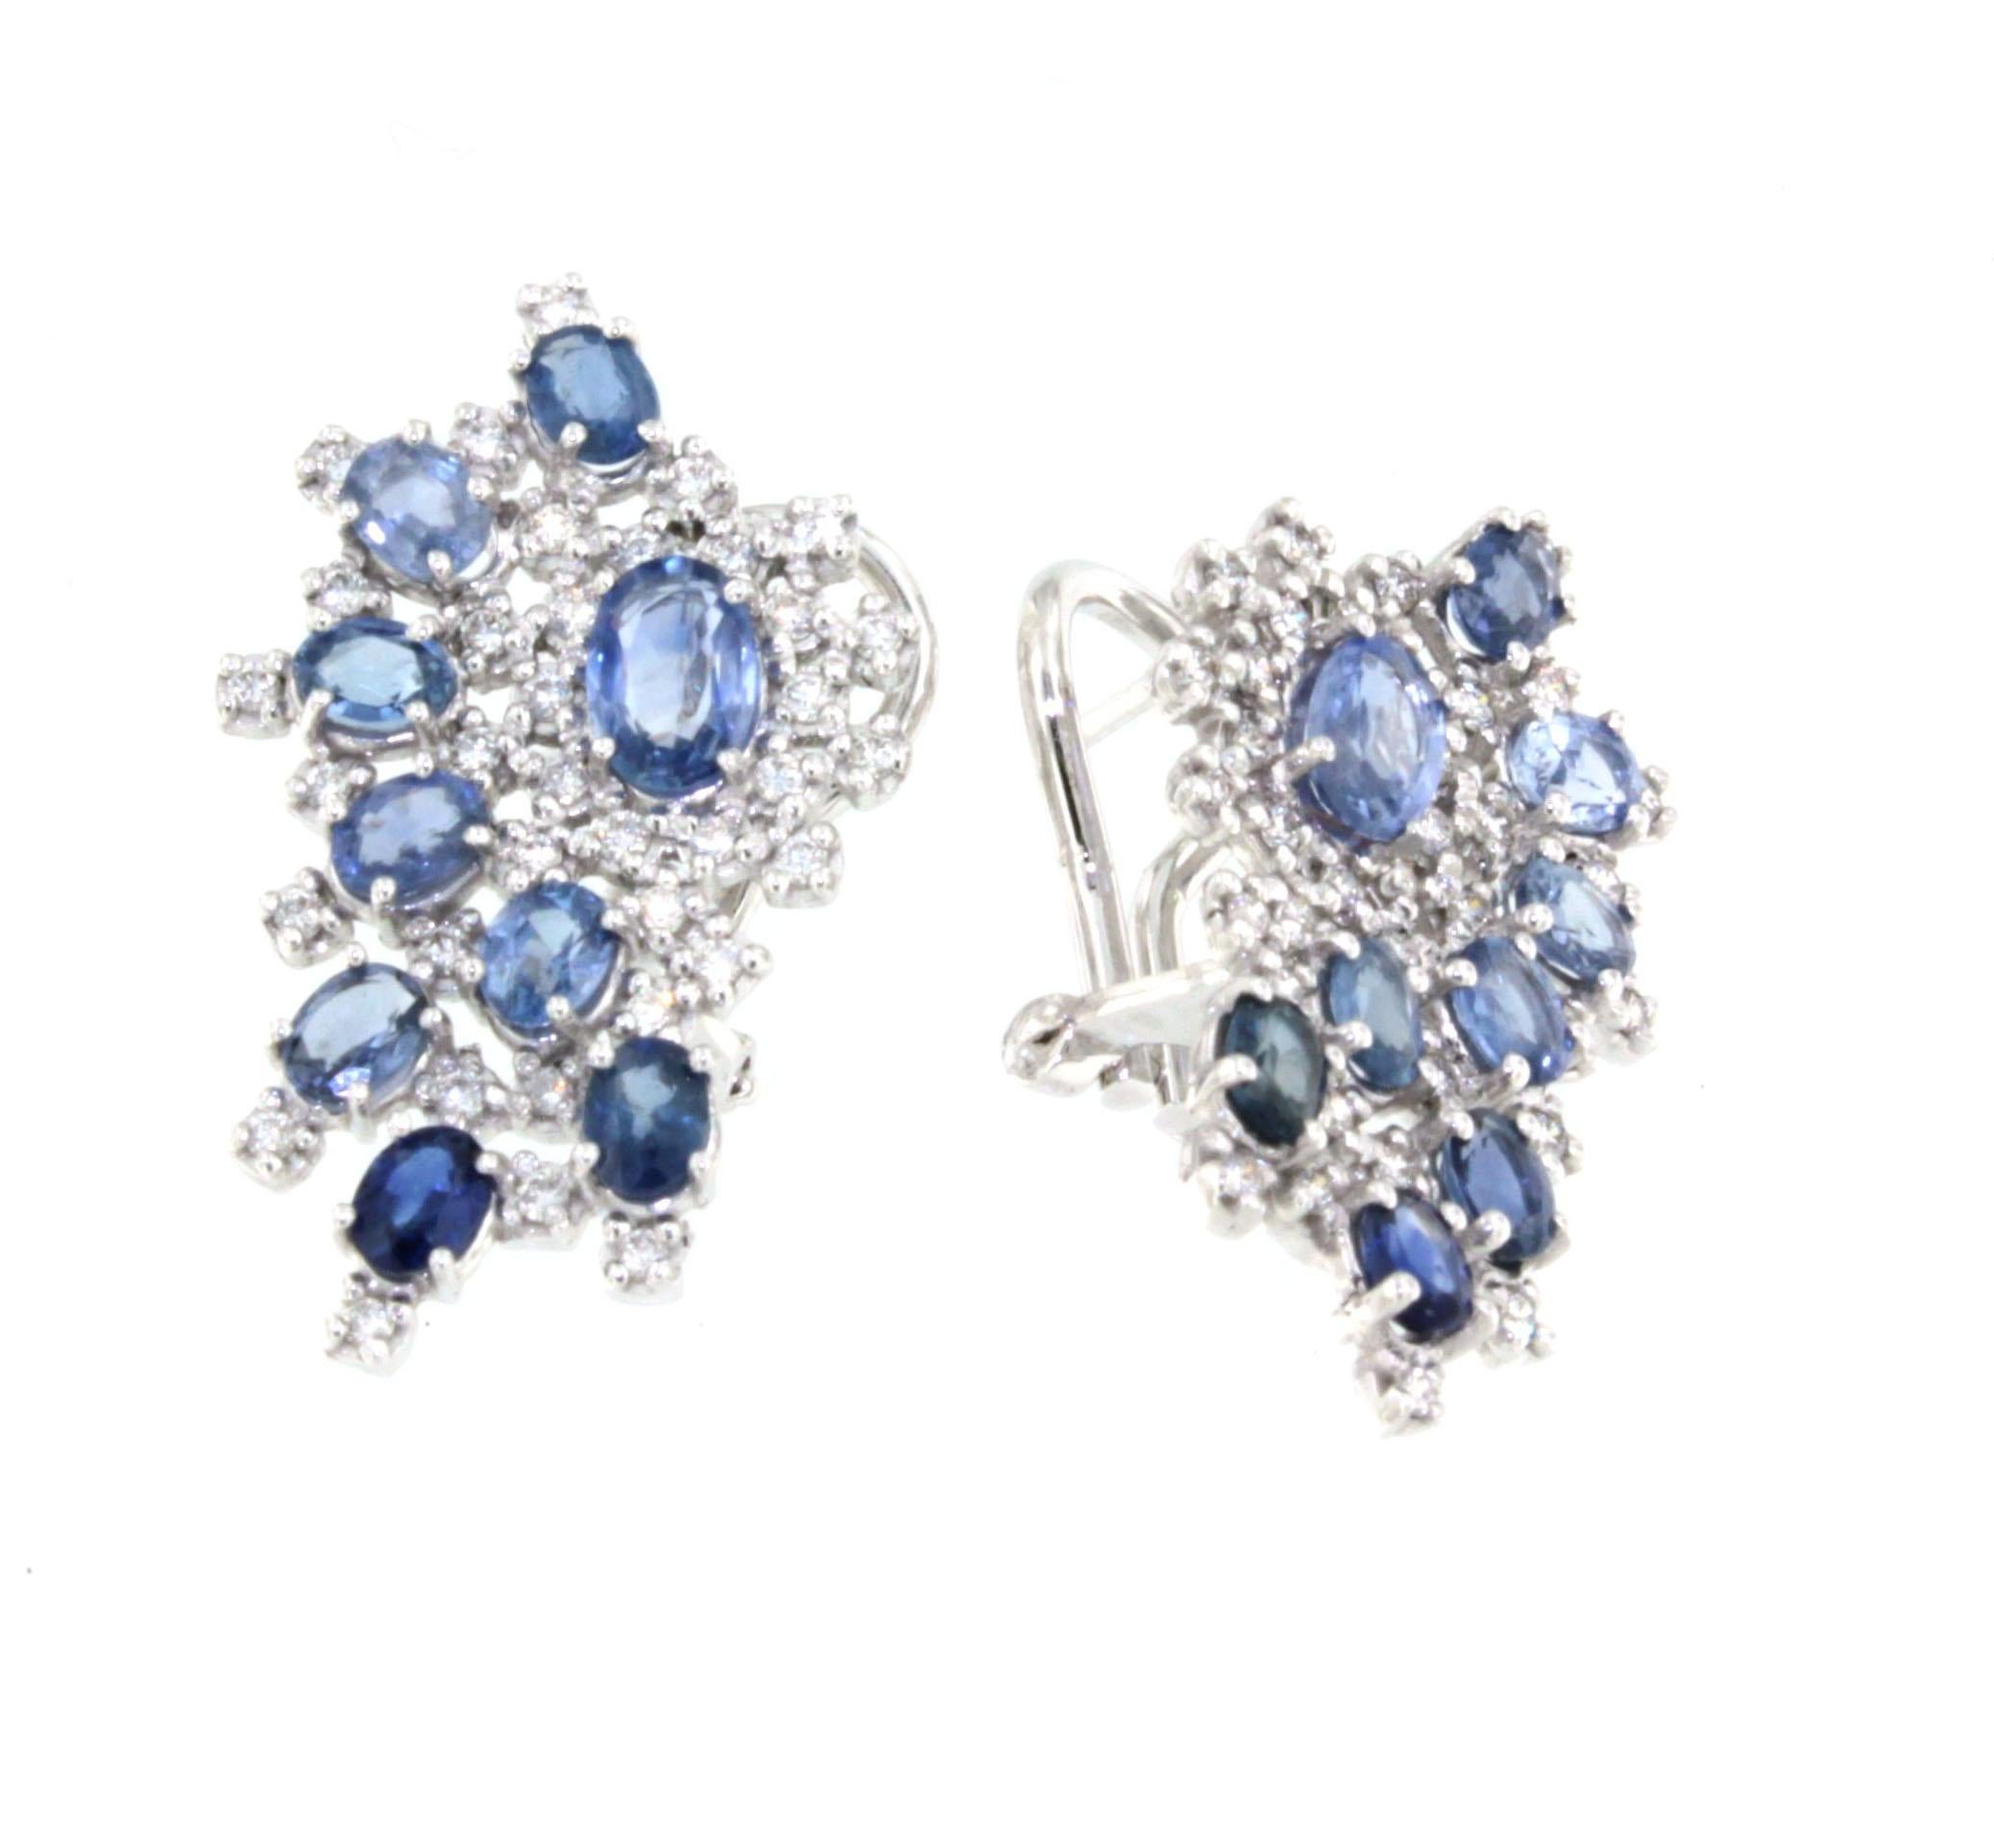 Beauty never stops until perfection is reached.
A unique piece for these elegant earrings made in Italy by Stanoppi Jewellery since 1948.
Modern and classic earrings in white gold 18kt with white Diamonds cts 1.15 and natural blue Sapphires cts